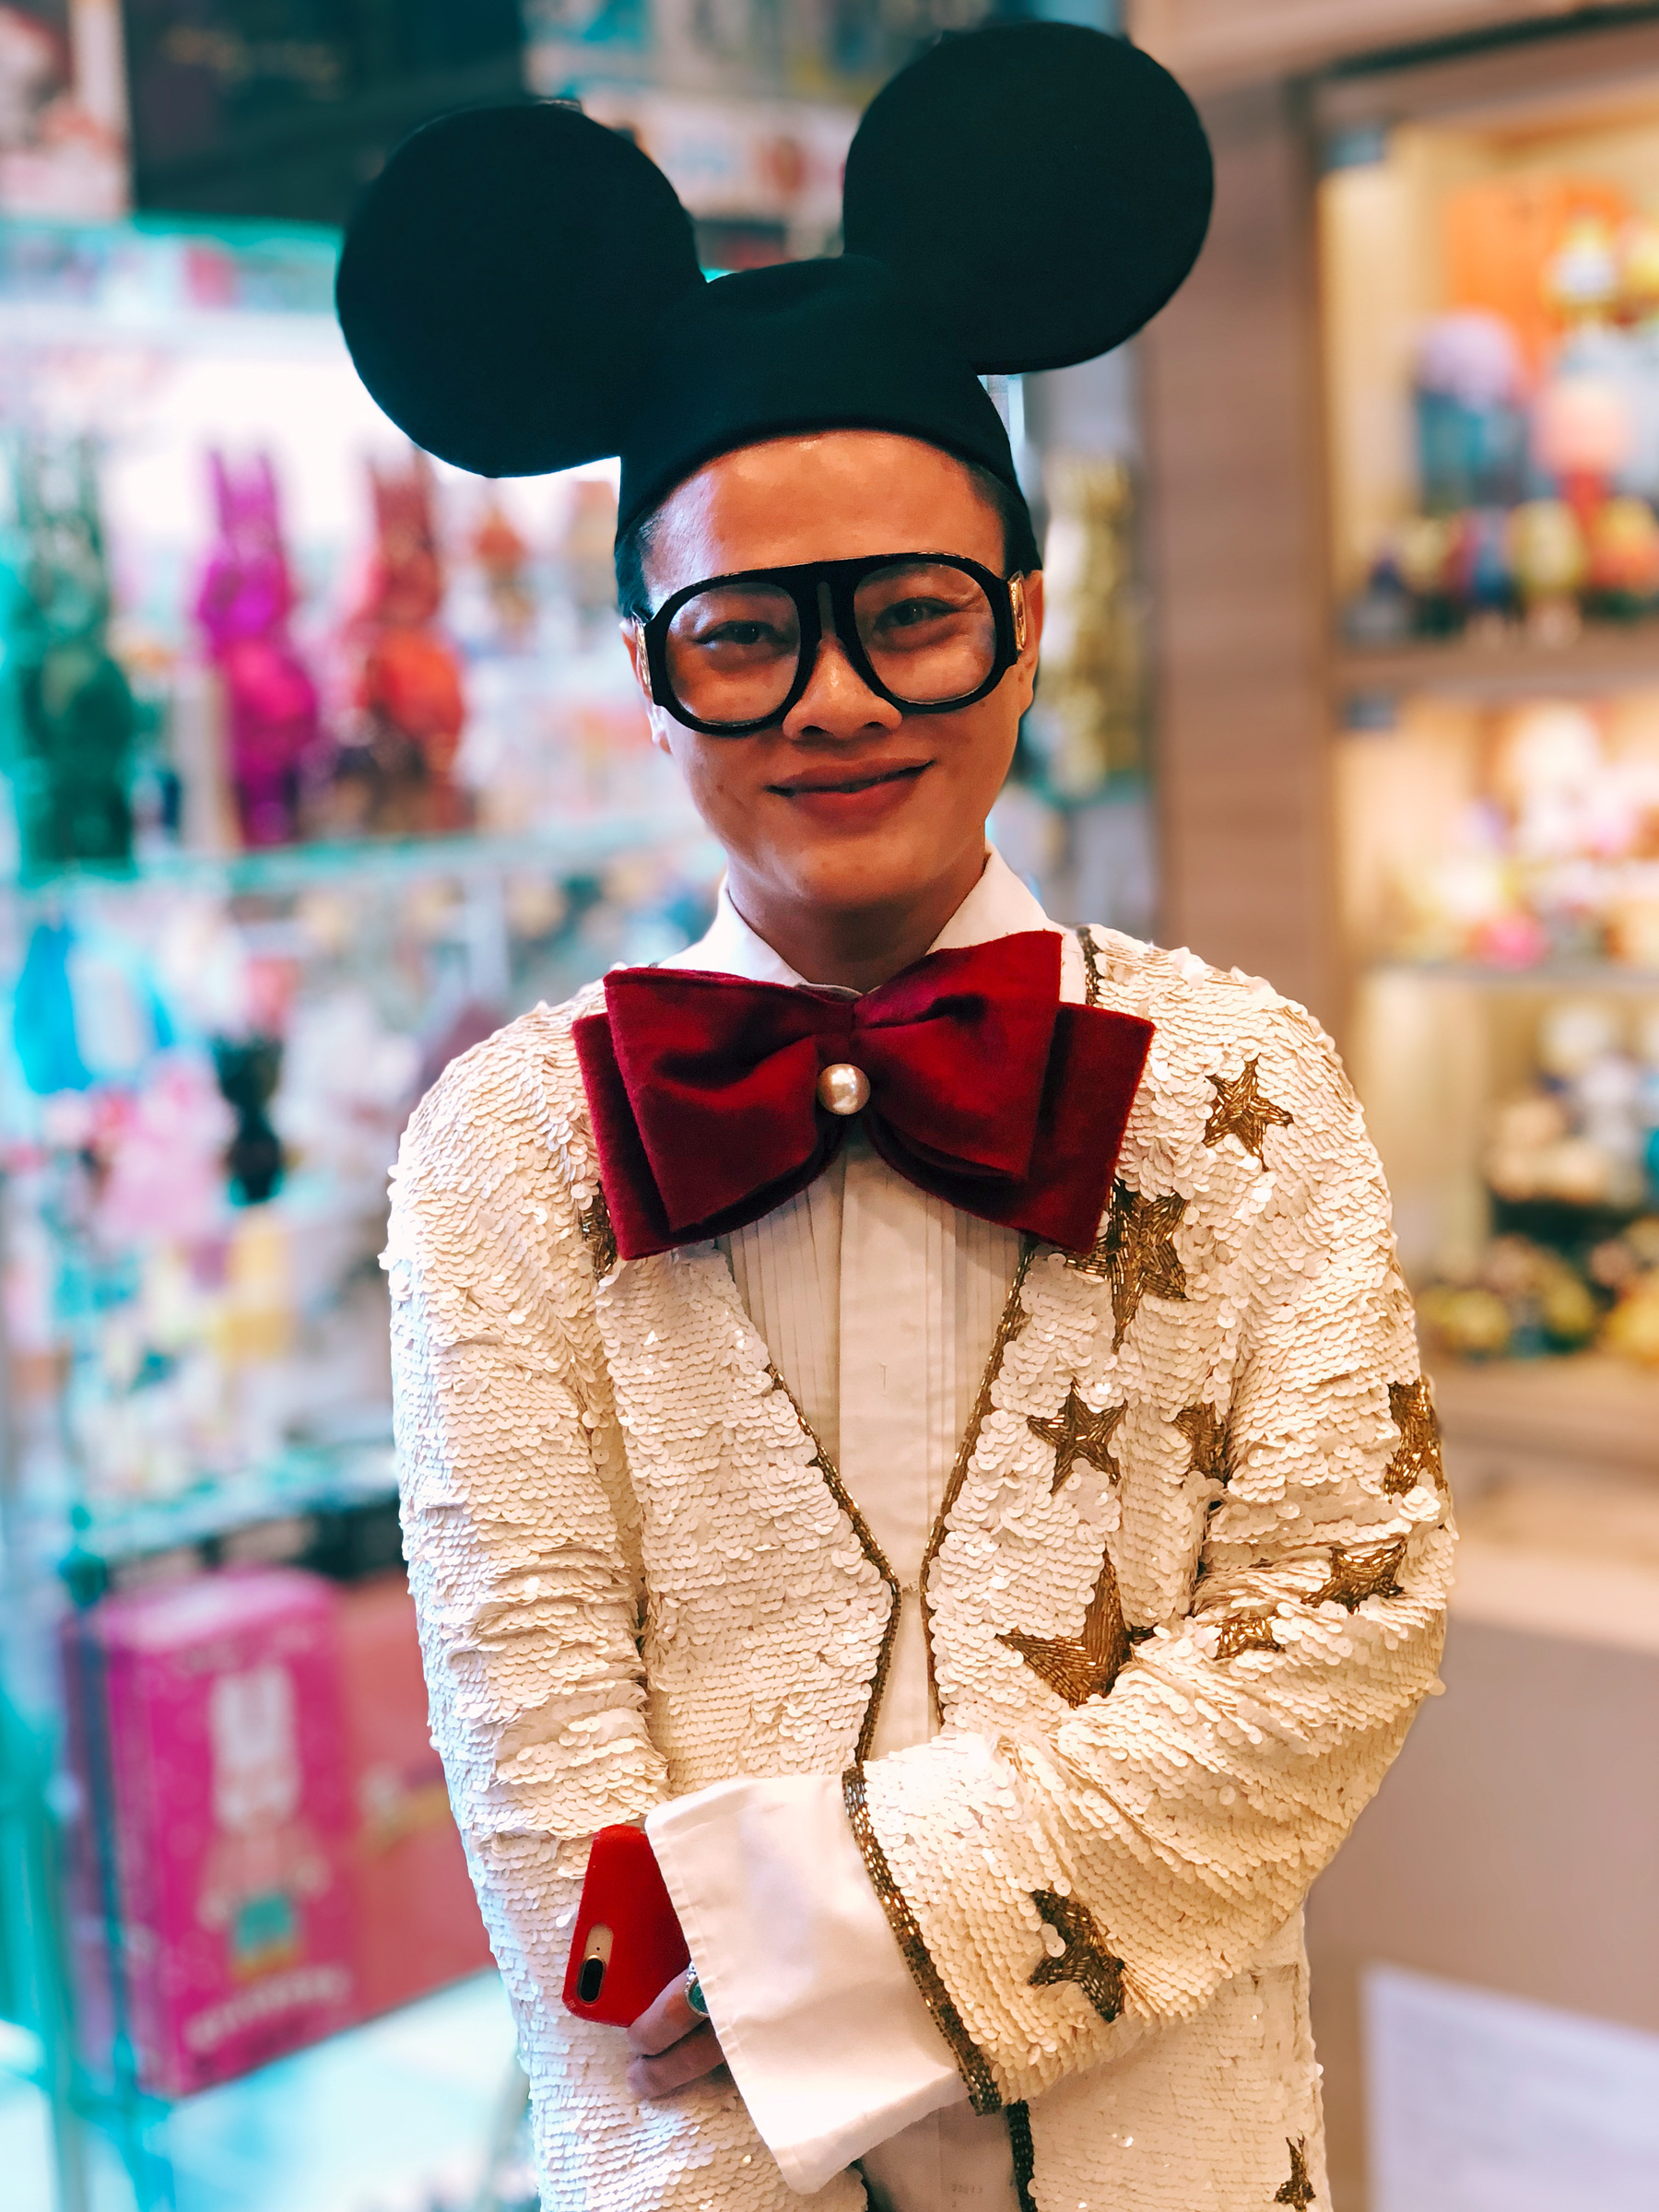 A young man dressed in a white jacket, with an oversized red bow tie, and Mickey Mouse ears. Big glasses too. 